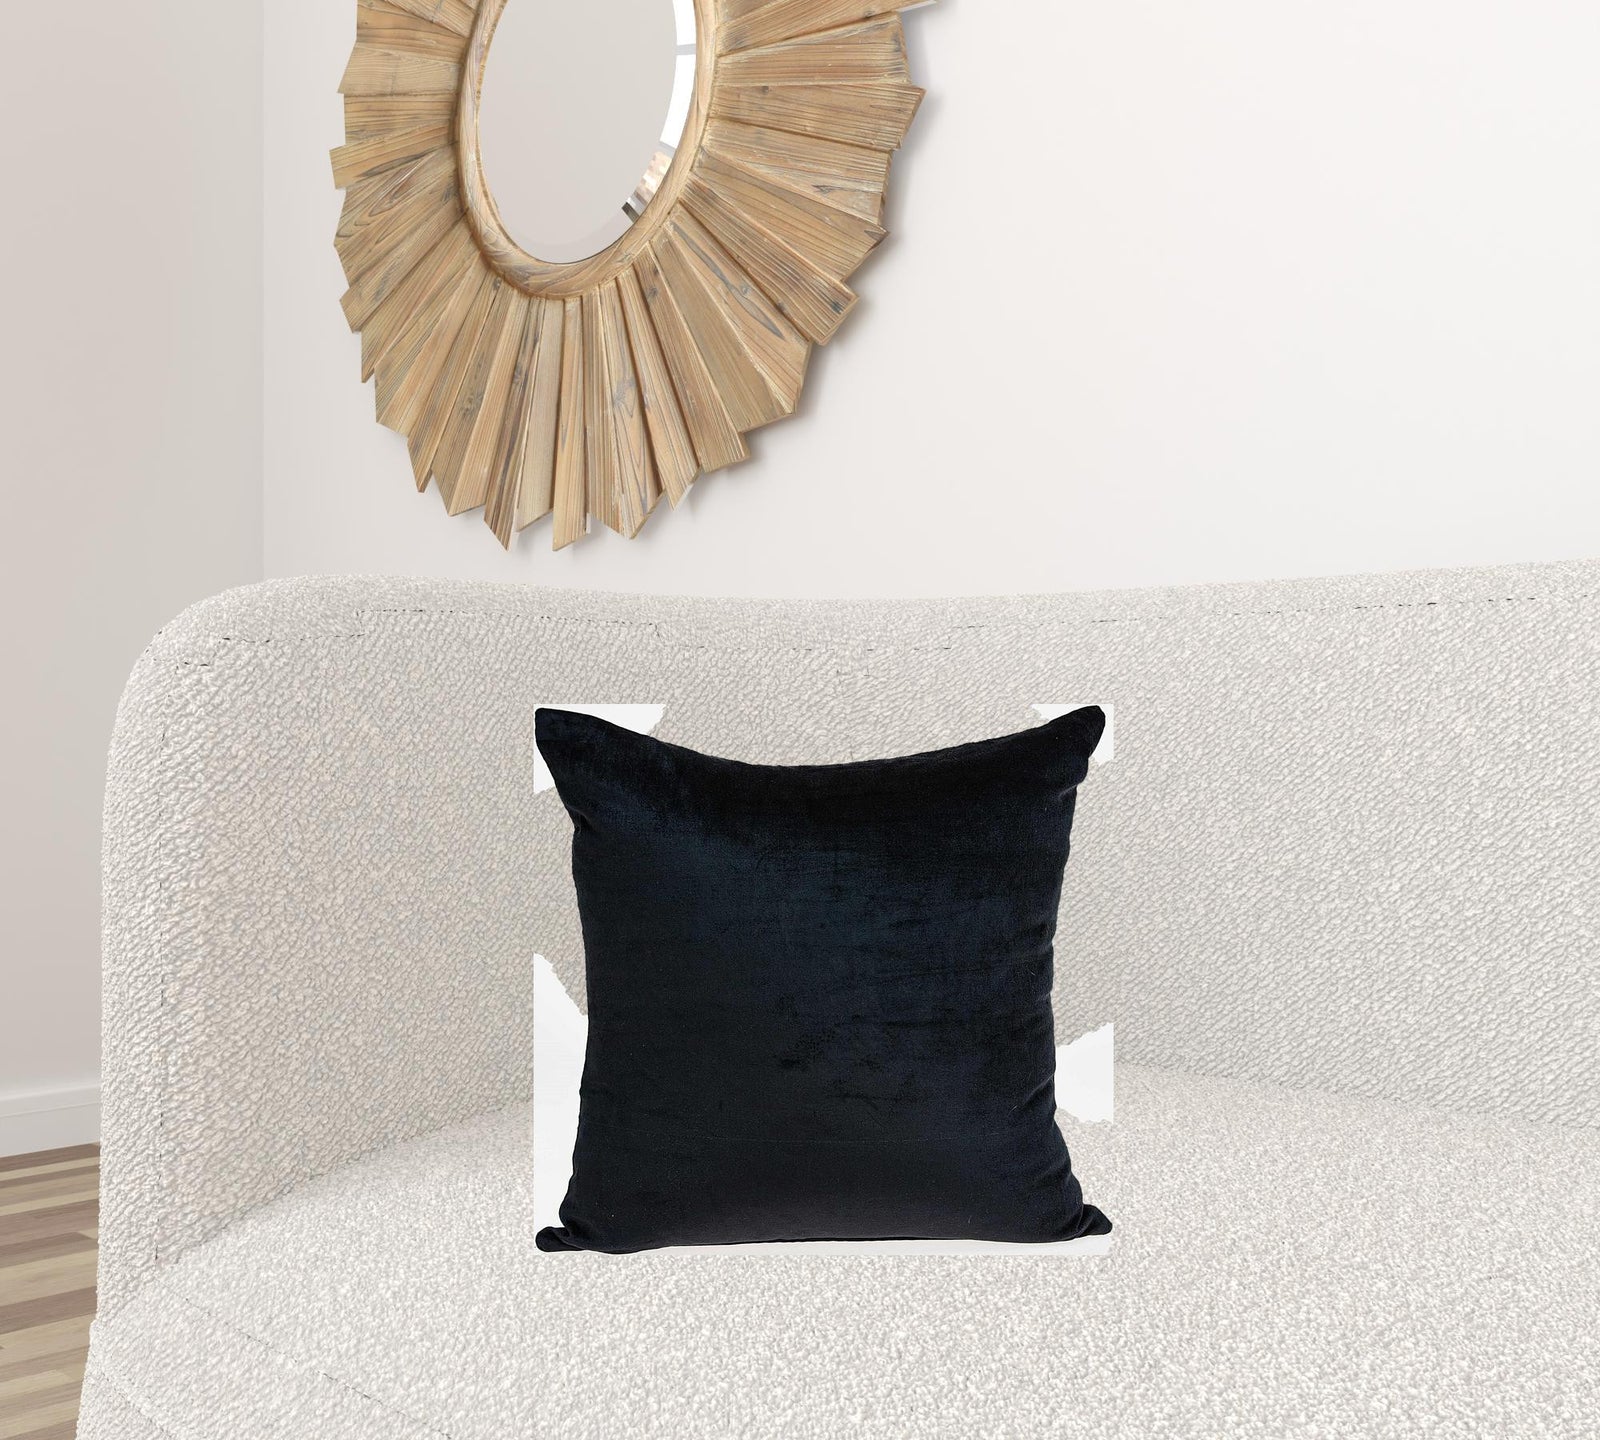 18" X 7" X 18" Transitional Black Solid Pillow Cover With Poly Insert